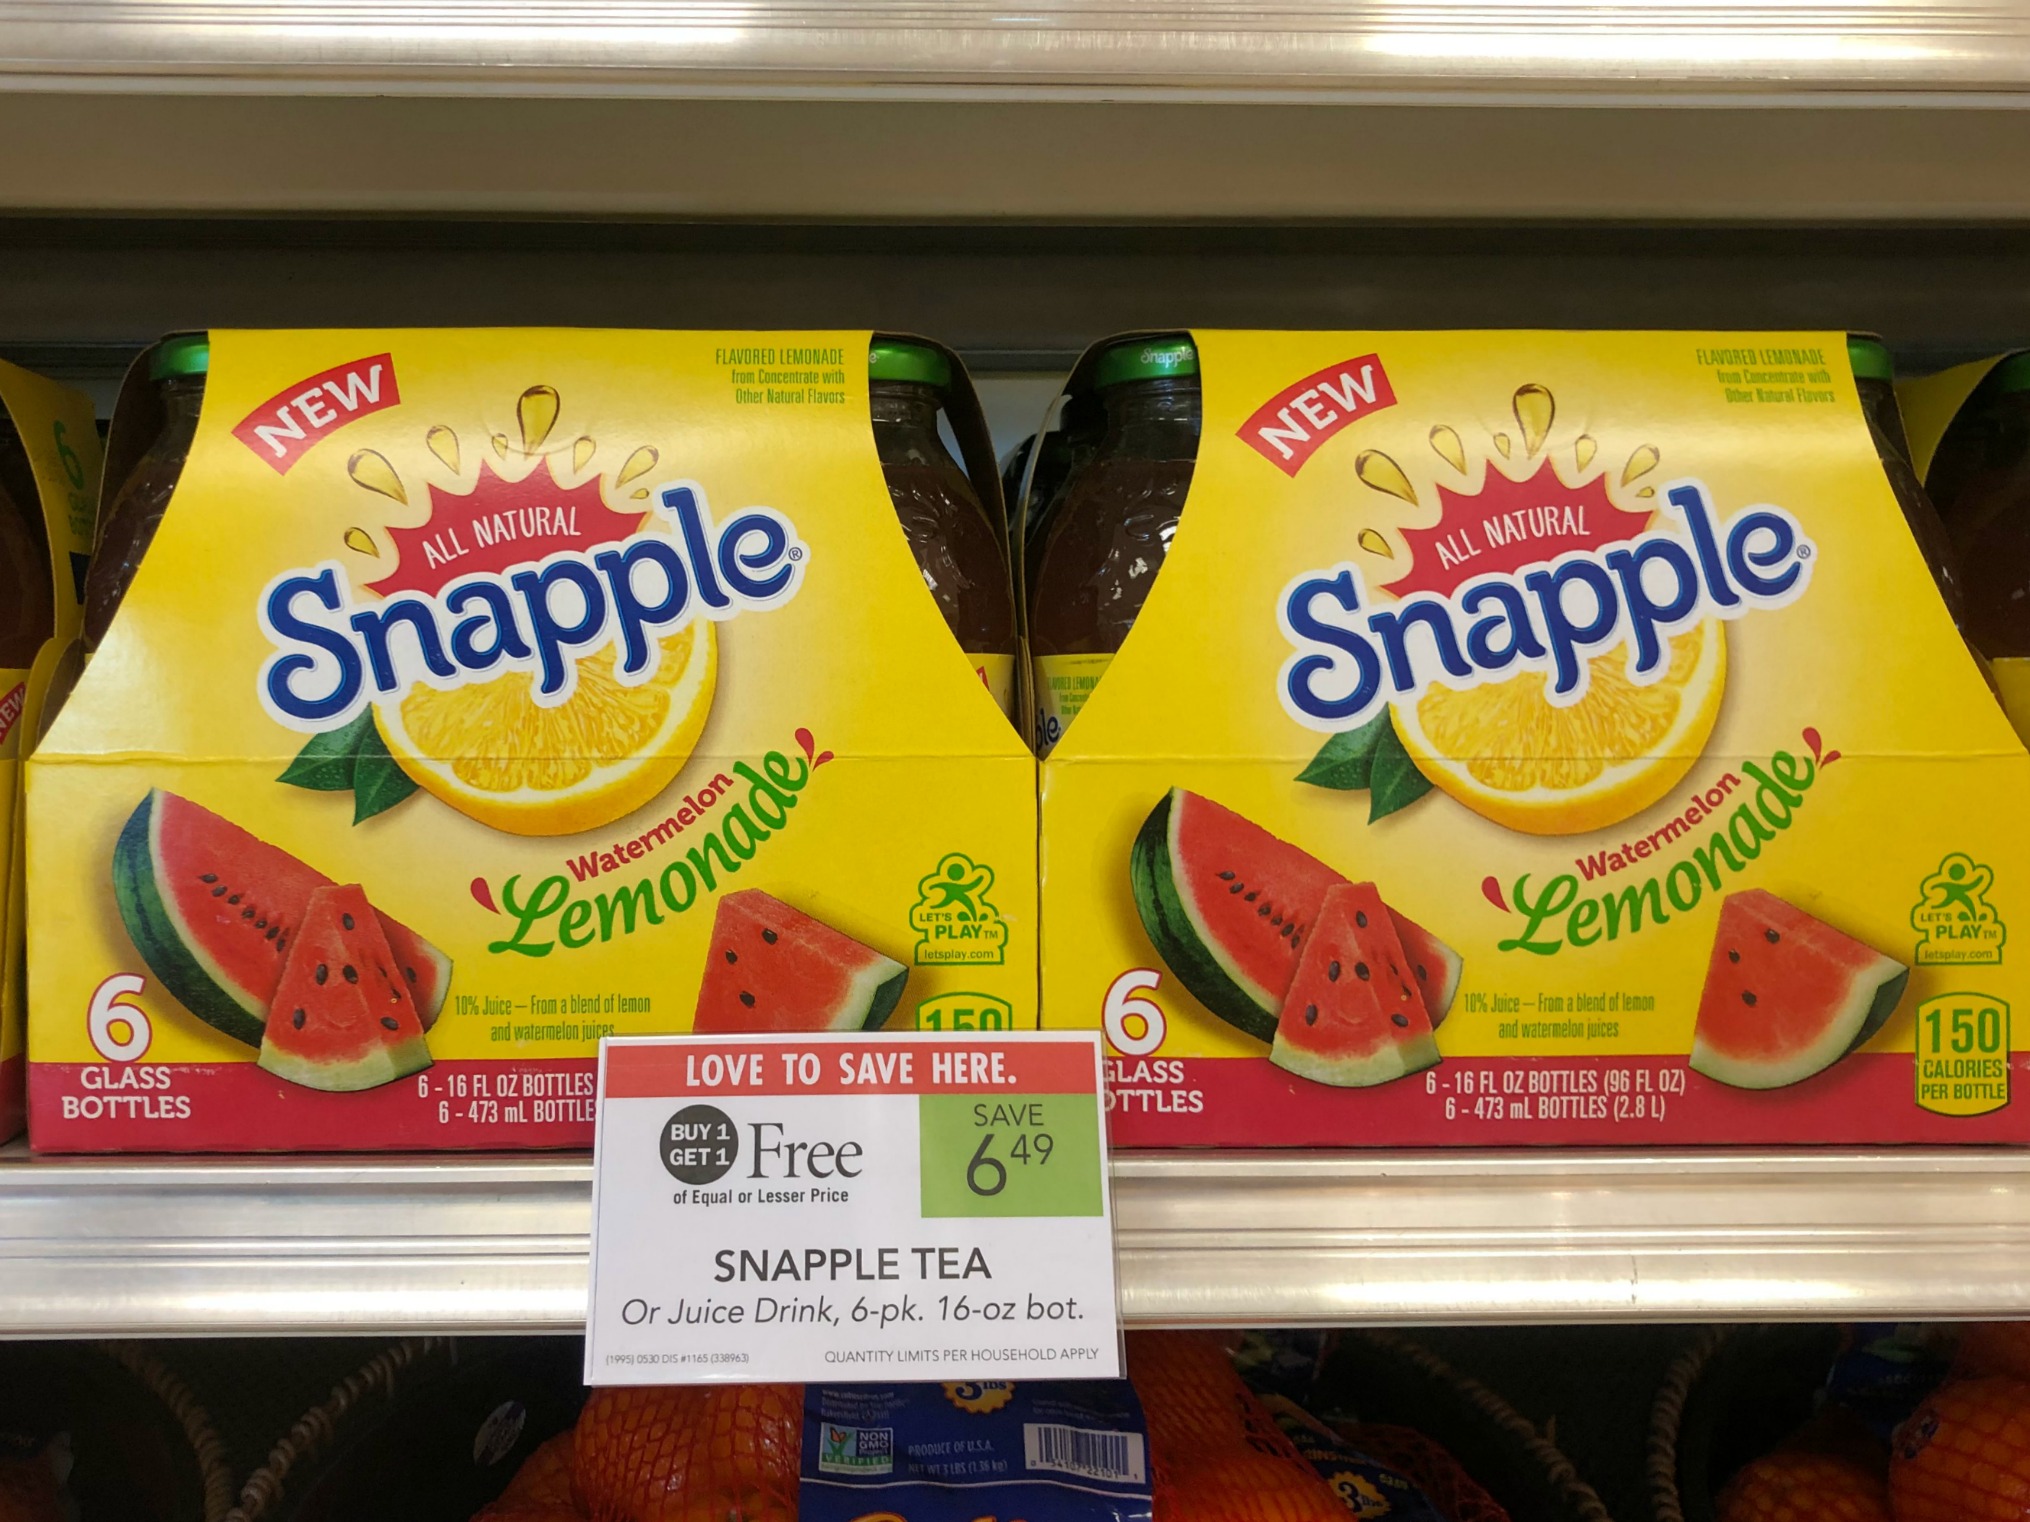 Stock Up On Delicious Snapple Flavors During The Publix BOGO Sale on I Heart Publix